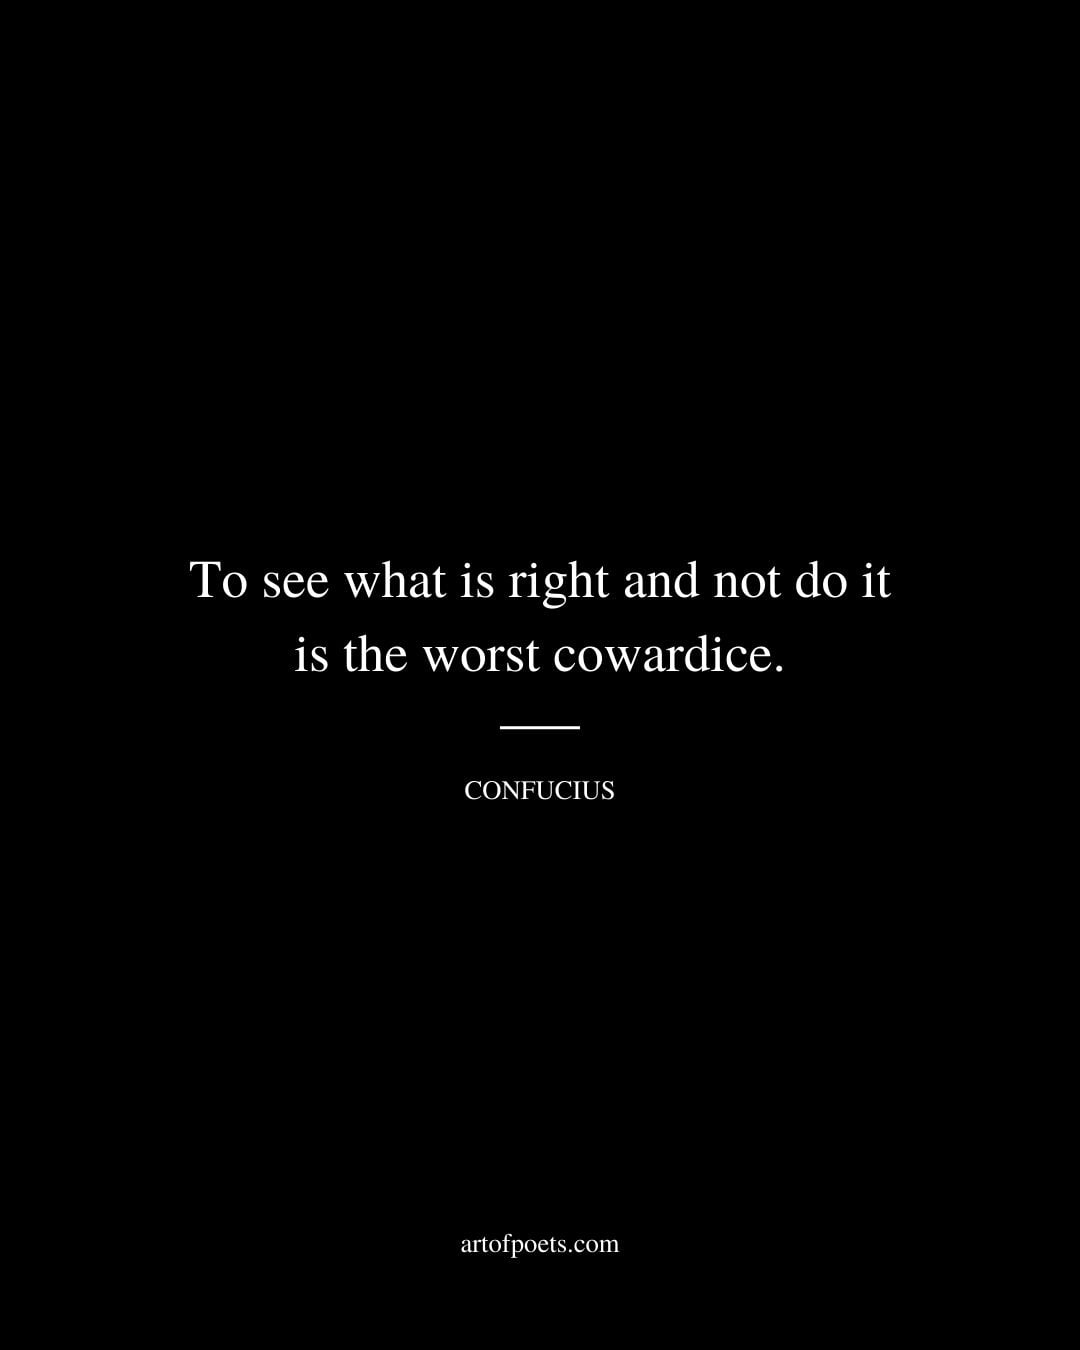 To see what is right and not do it is the worst cowardice